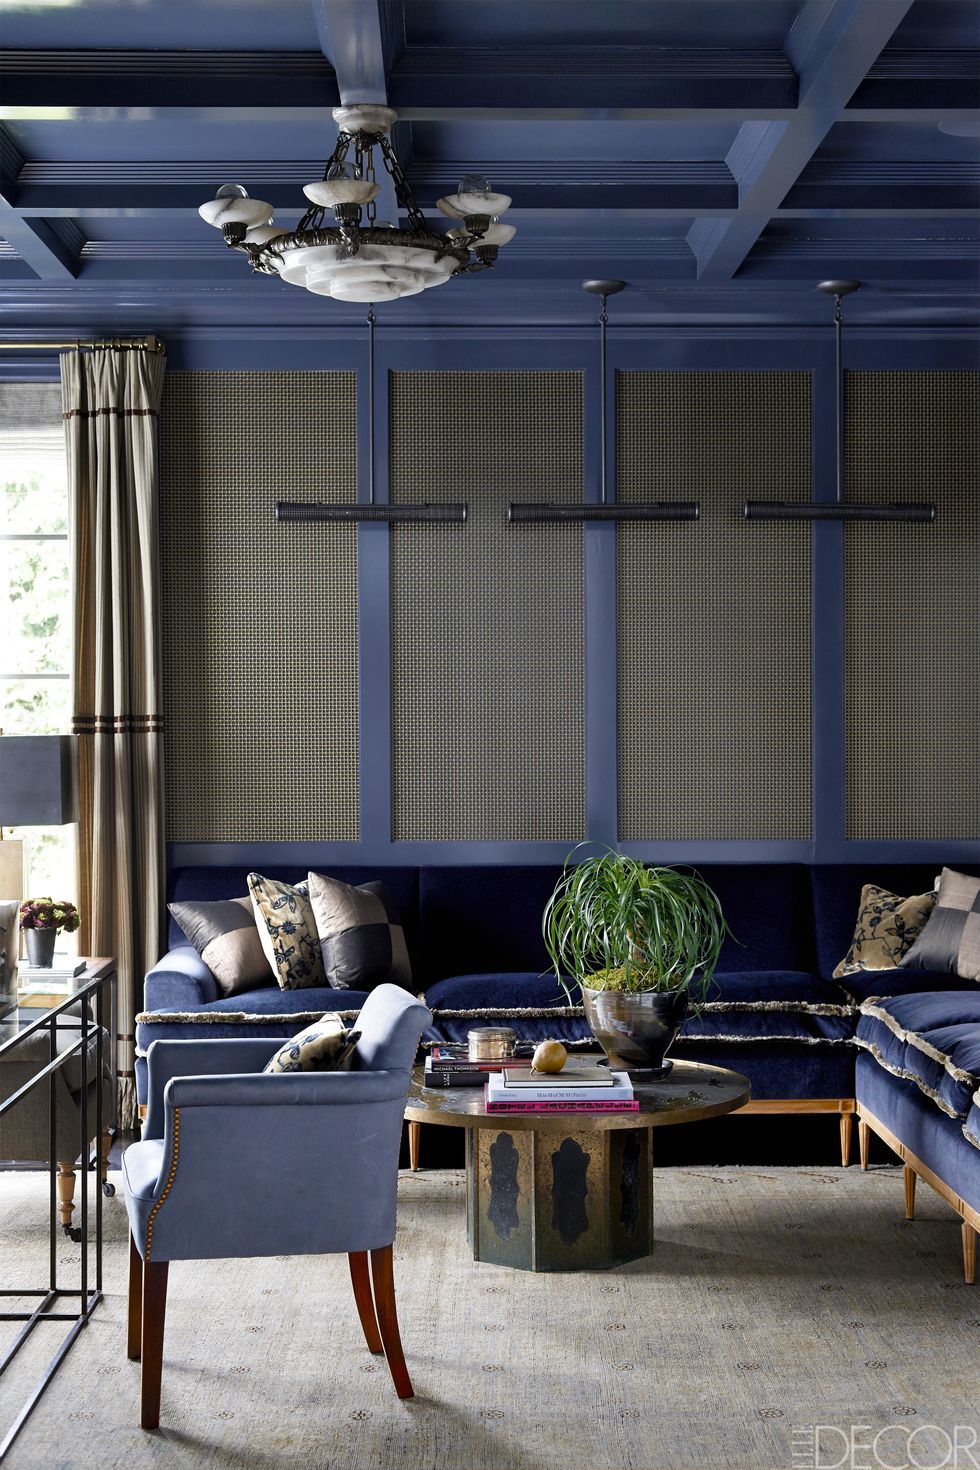 How to Paint Your Ceiling - Perfect The Painted Ceiling Trend